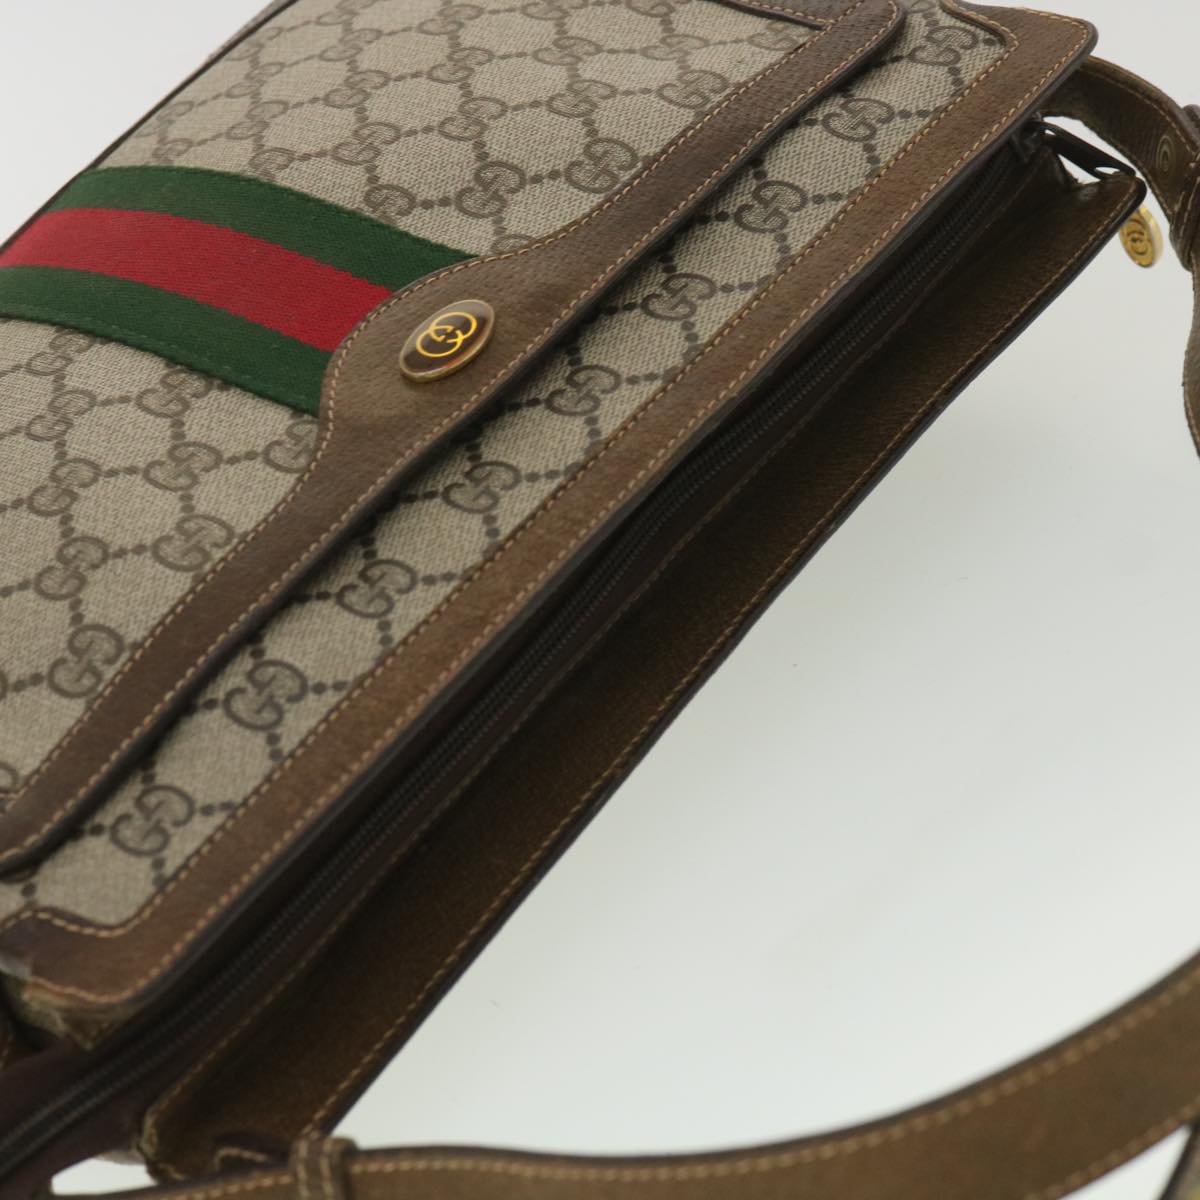 GUCCI GG Canvas Web Sherry Line Shoulder Bag PVC Leather Beige Red Auth yk5883B